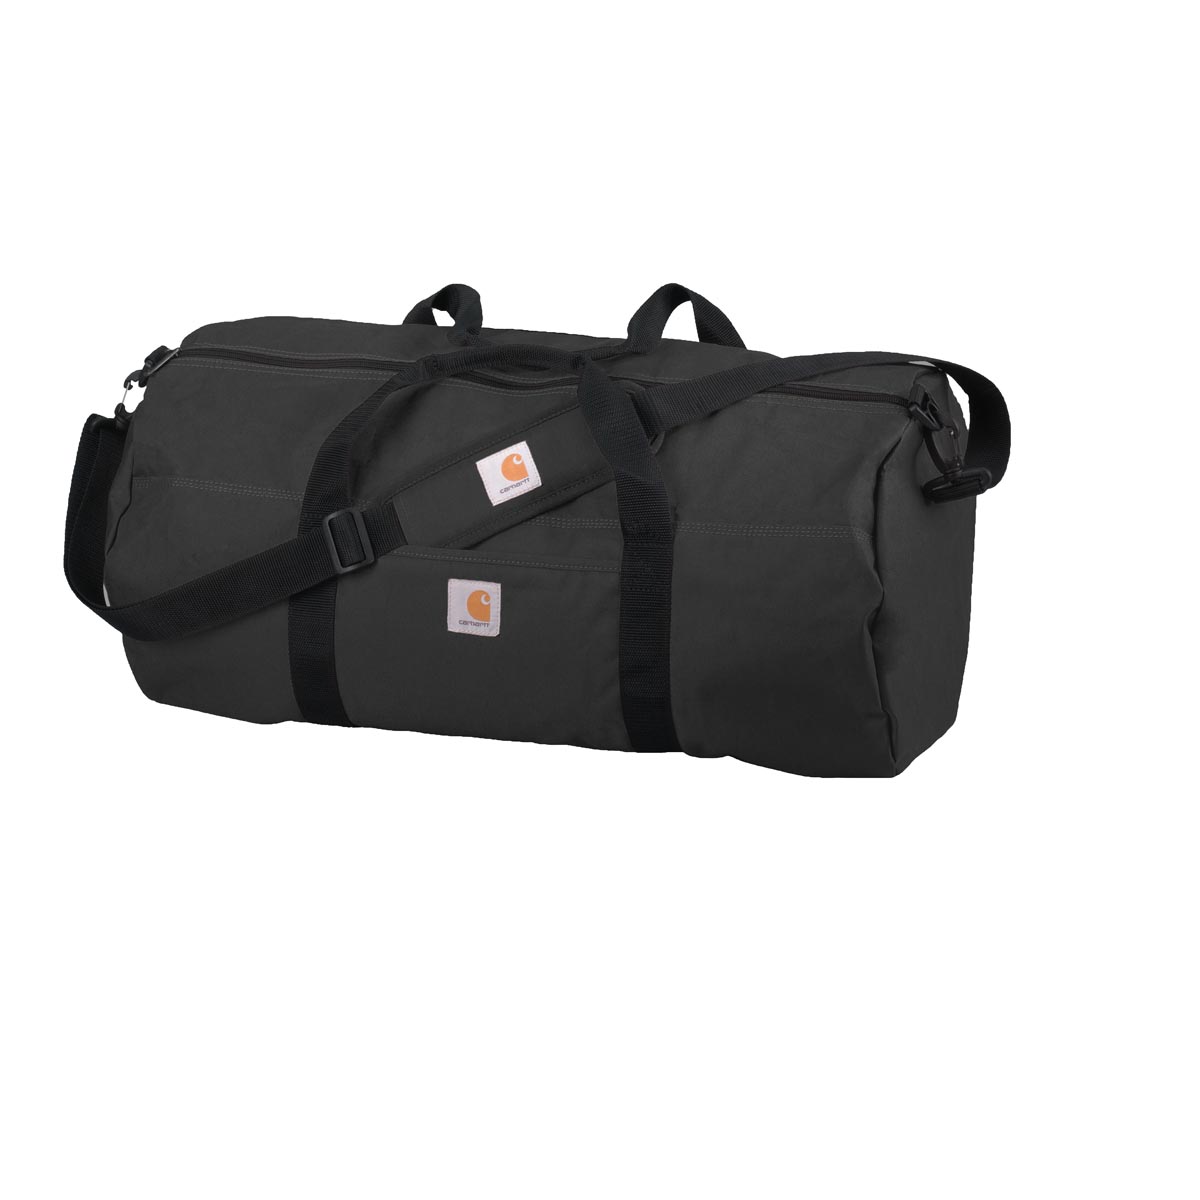 Carhartt Trade Series Large Duffel with Utility Pouch